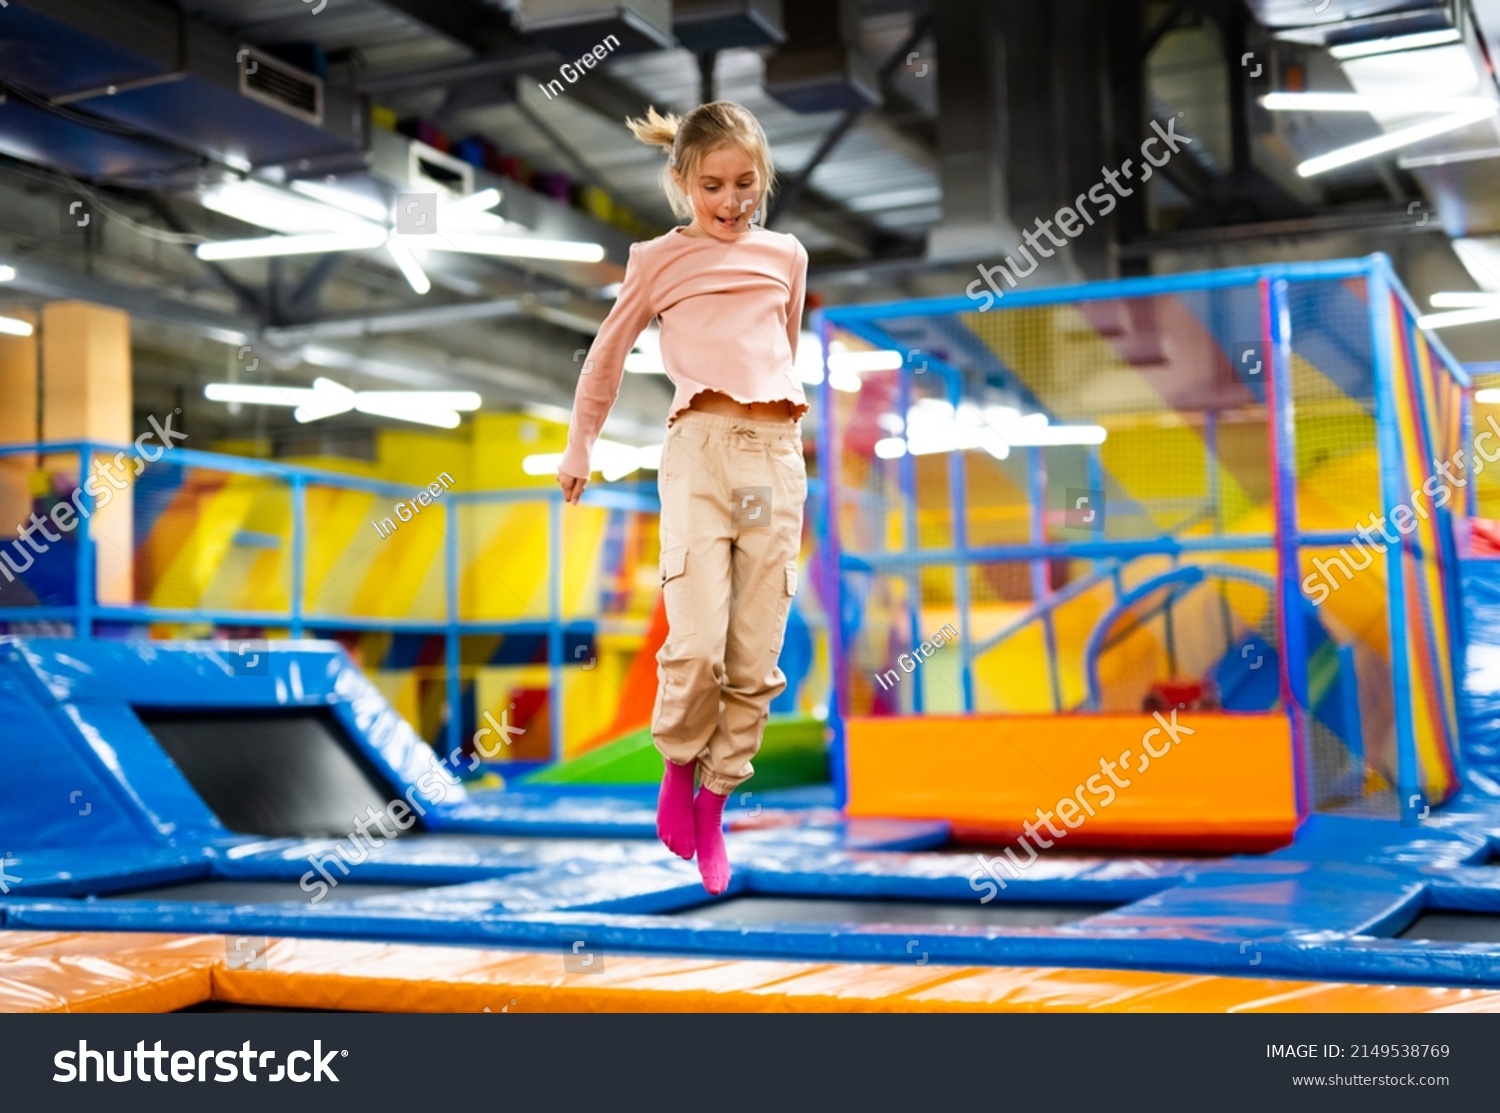 Pretty girl kid jumping on colorful trampoline at playground park and smiling. Caucasian preteen child during active entertaiments indoor #2149538769